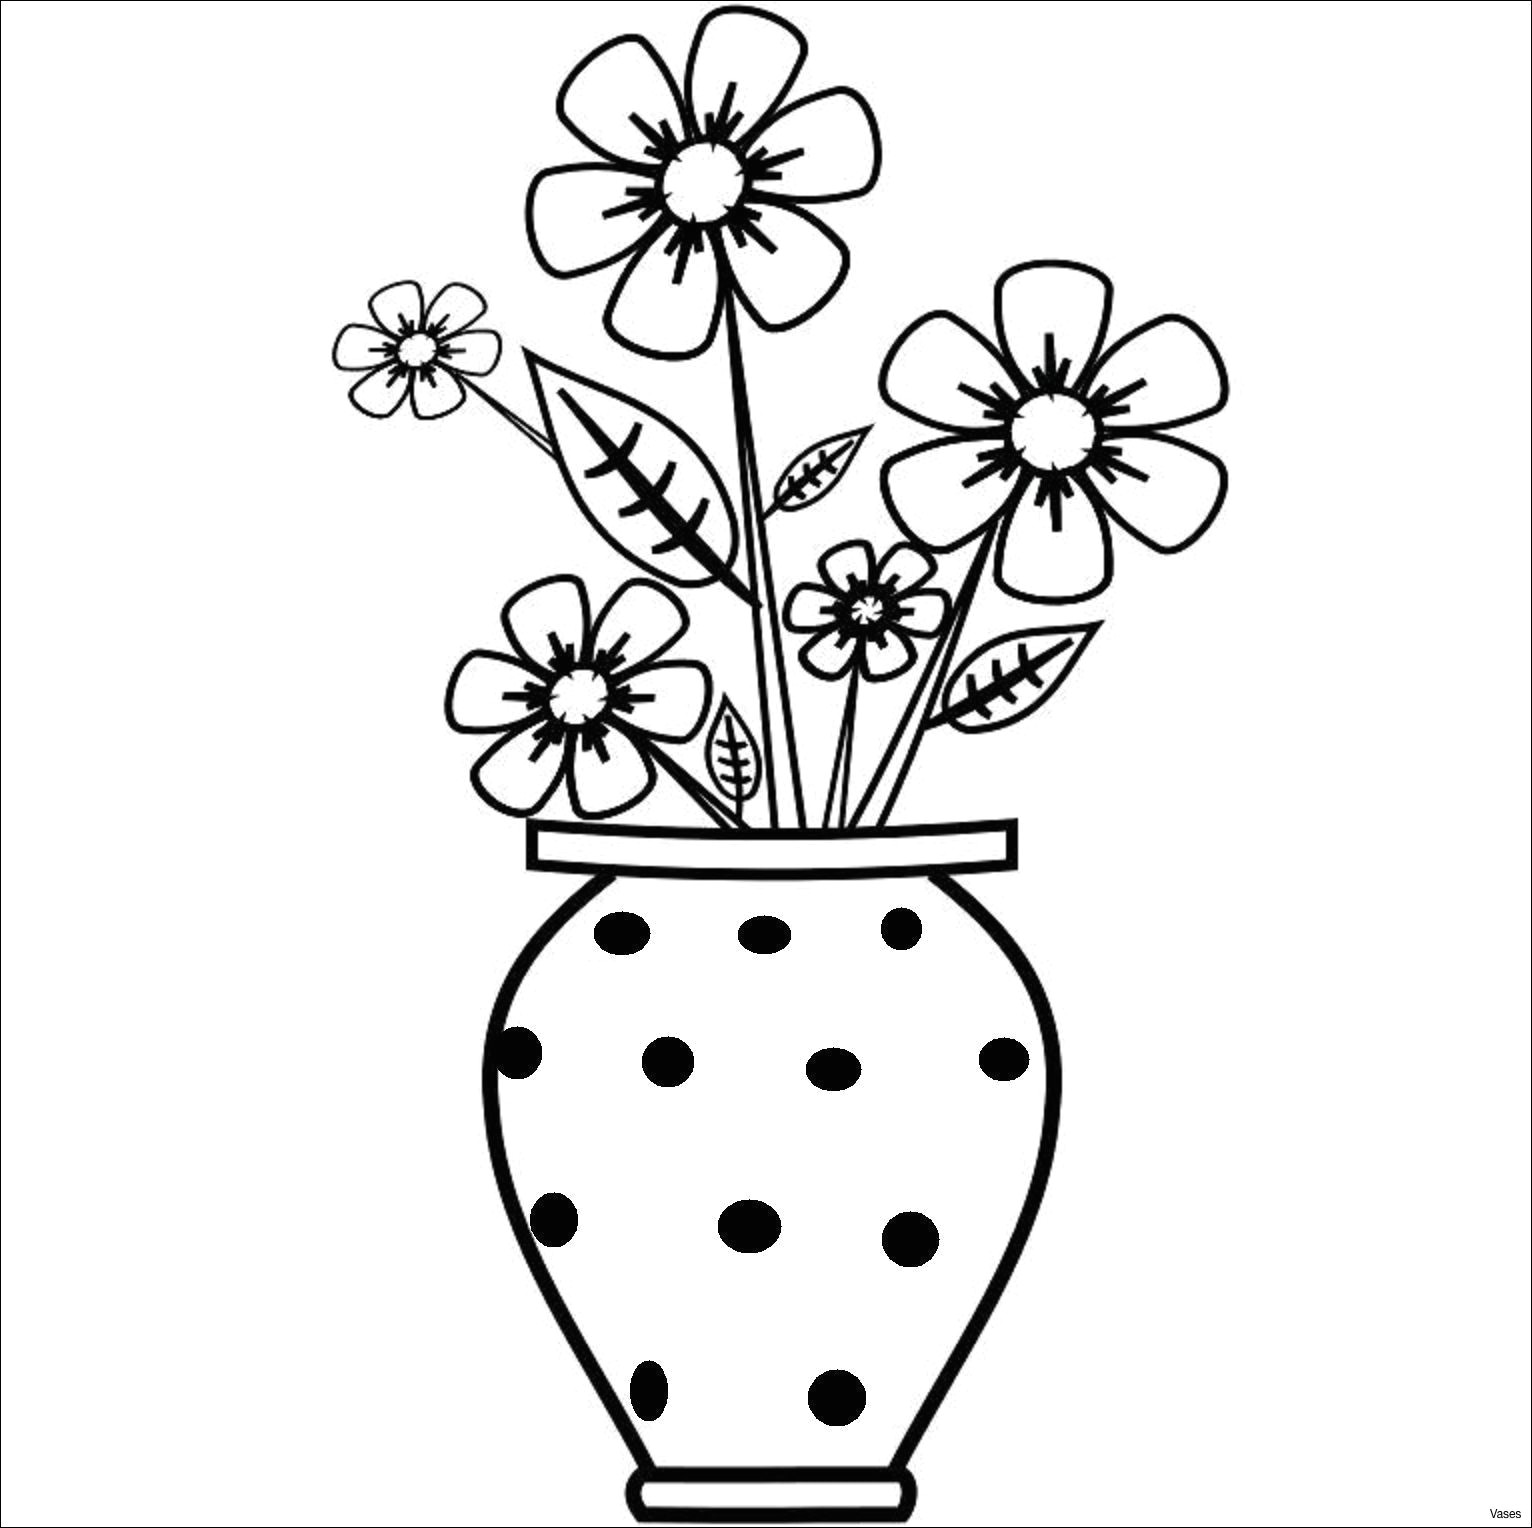 Drawings Of Flowers Easy Step by Step Pics Of Drawings Easy Vase Art Drawings How to Draw A Vase Step 2h